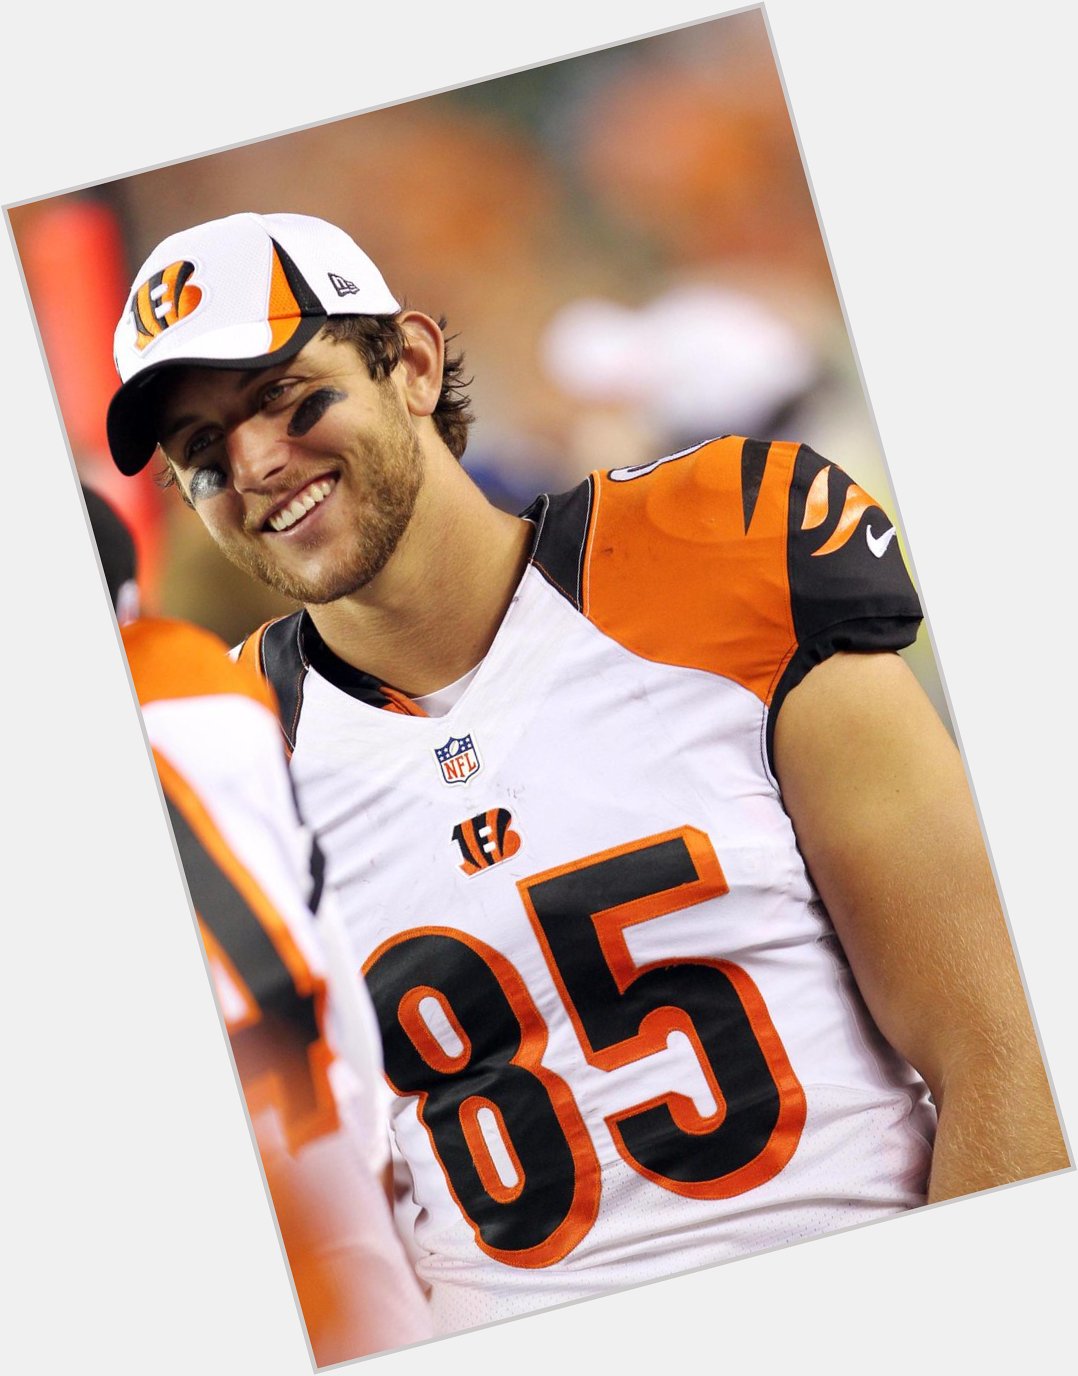 Happy 25th birthday to the one and only Tyler Eifert! Congratulations 